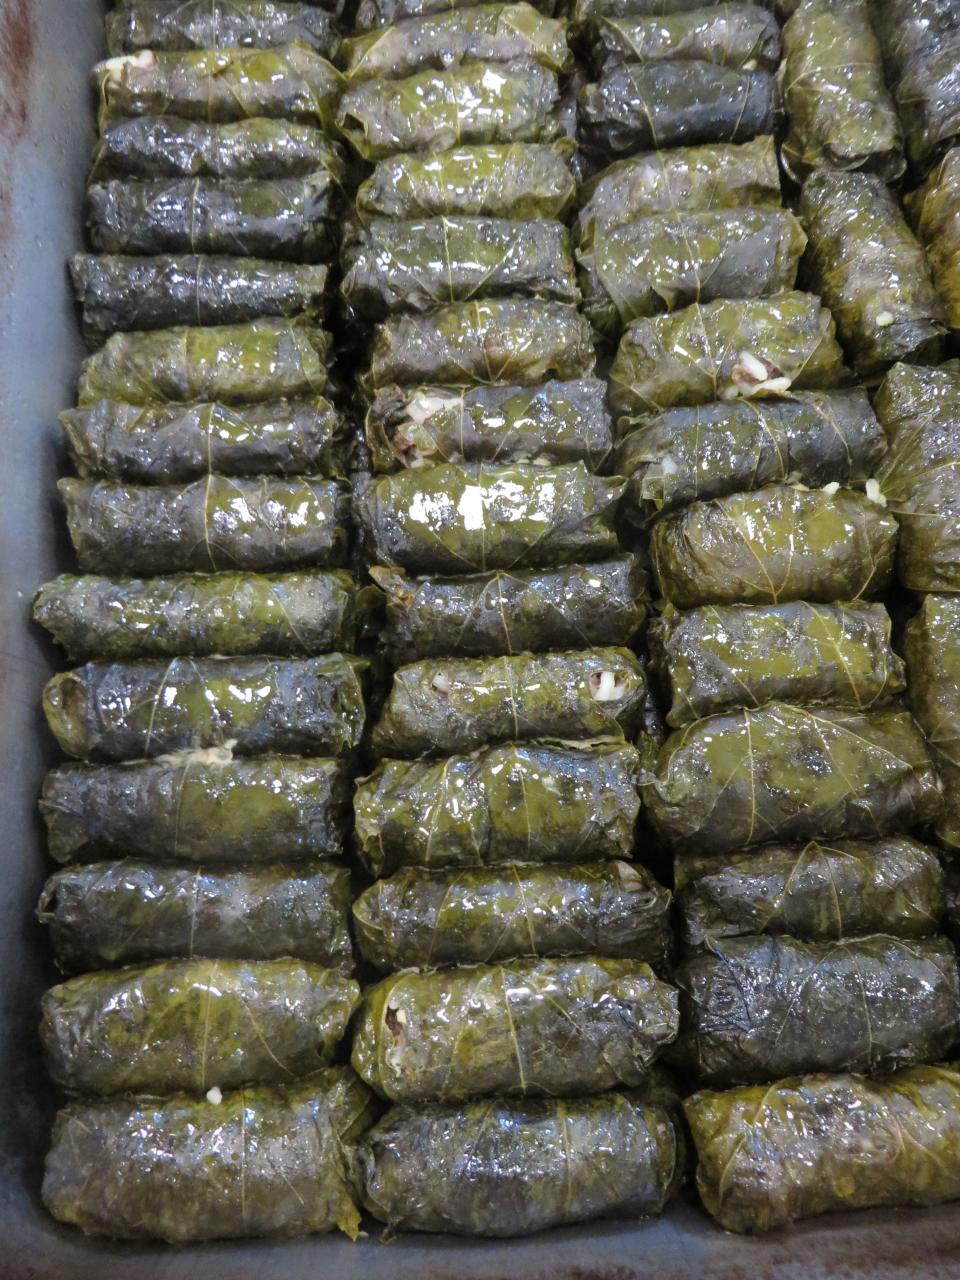 Dolmathes (stuffed grape leaves) are readied for the Greek Festival.